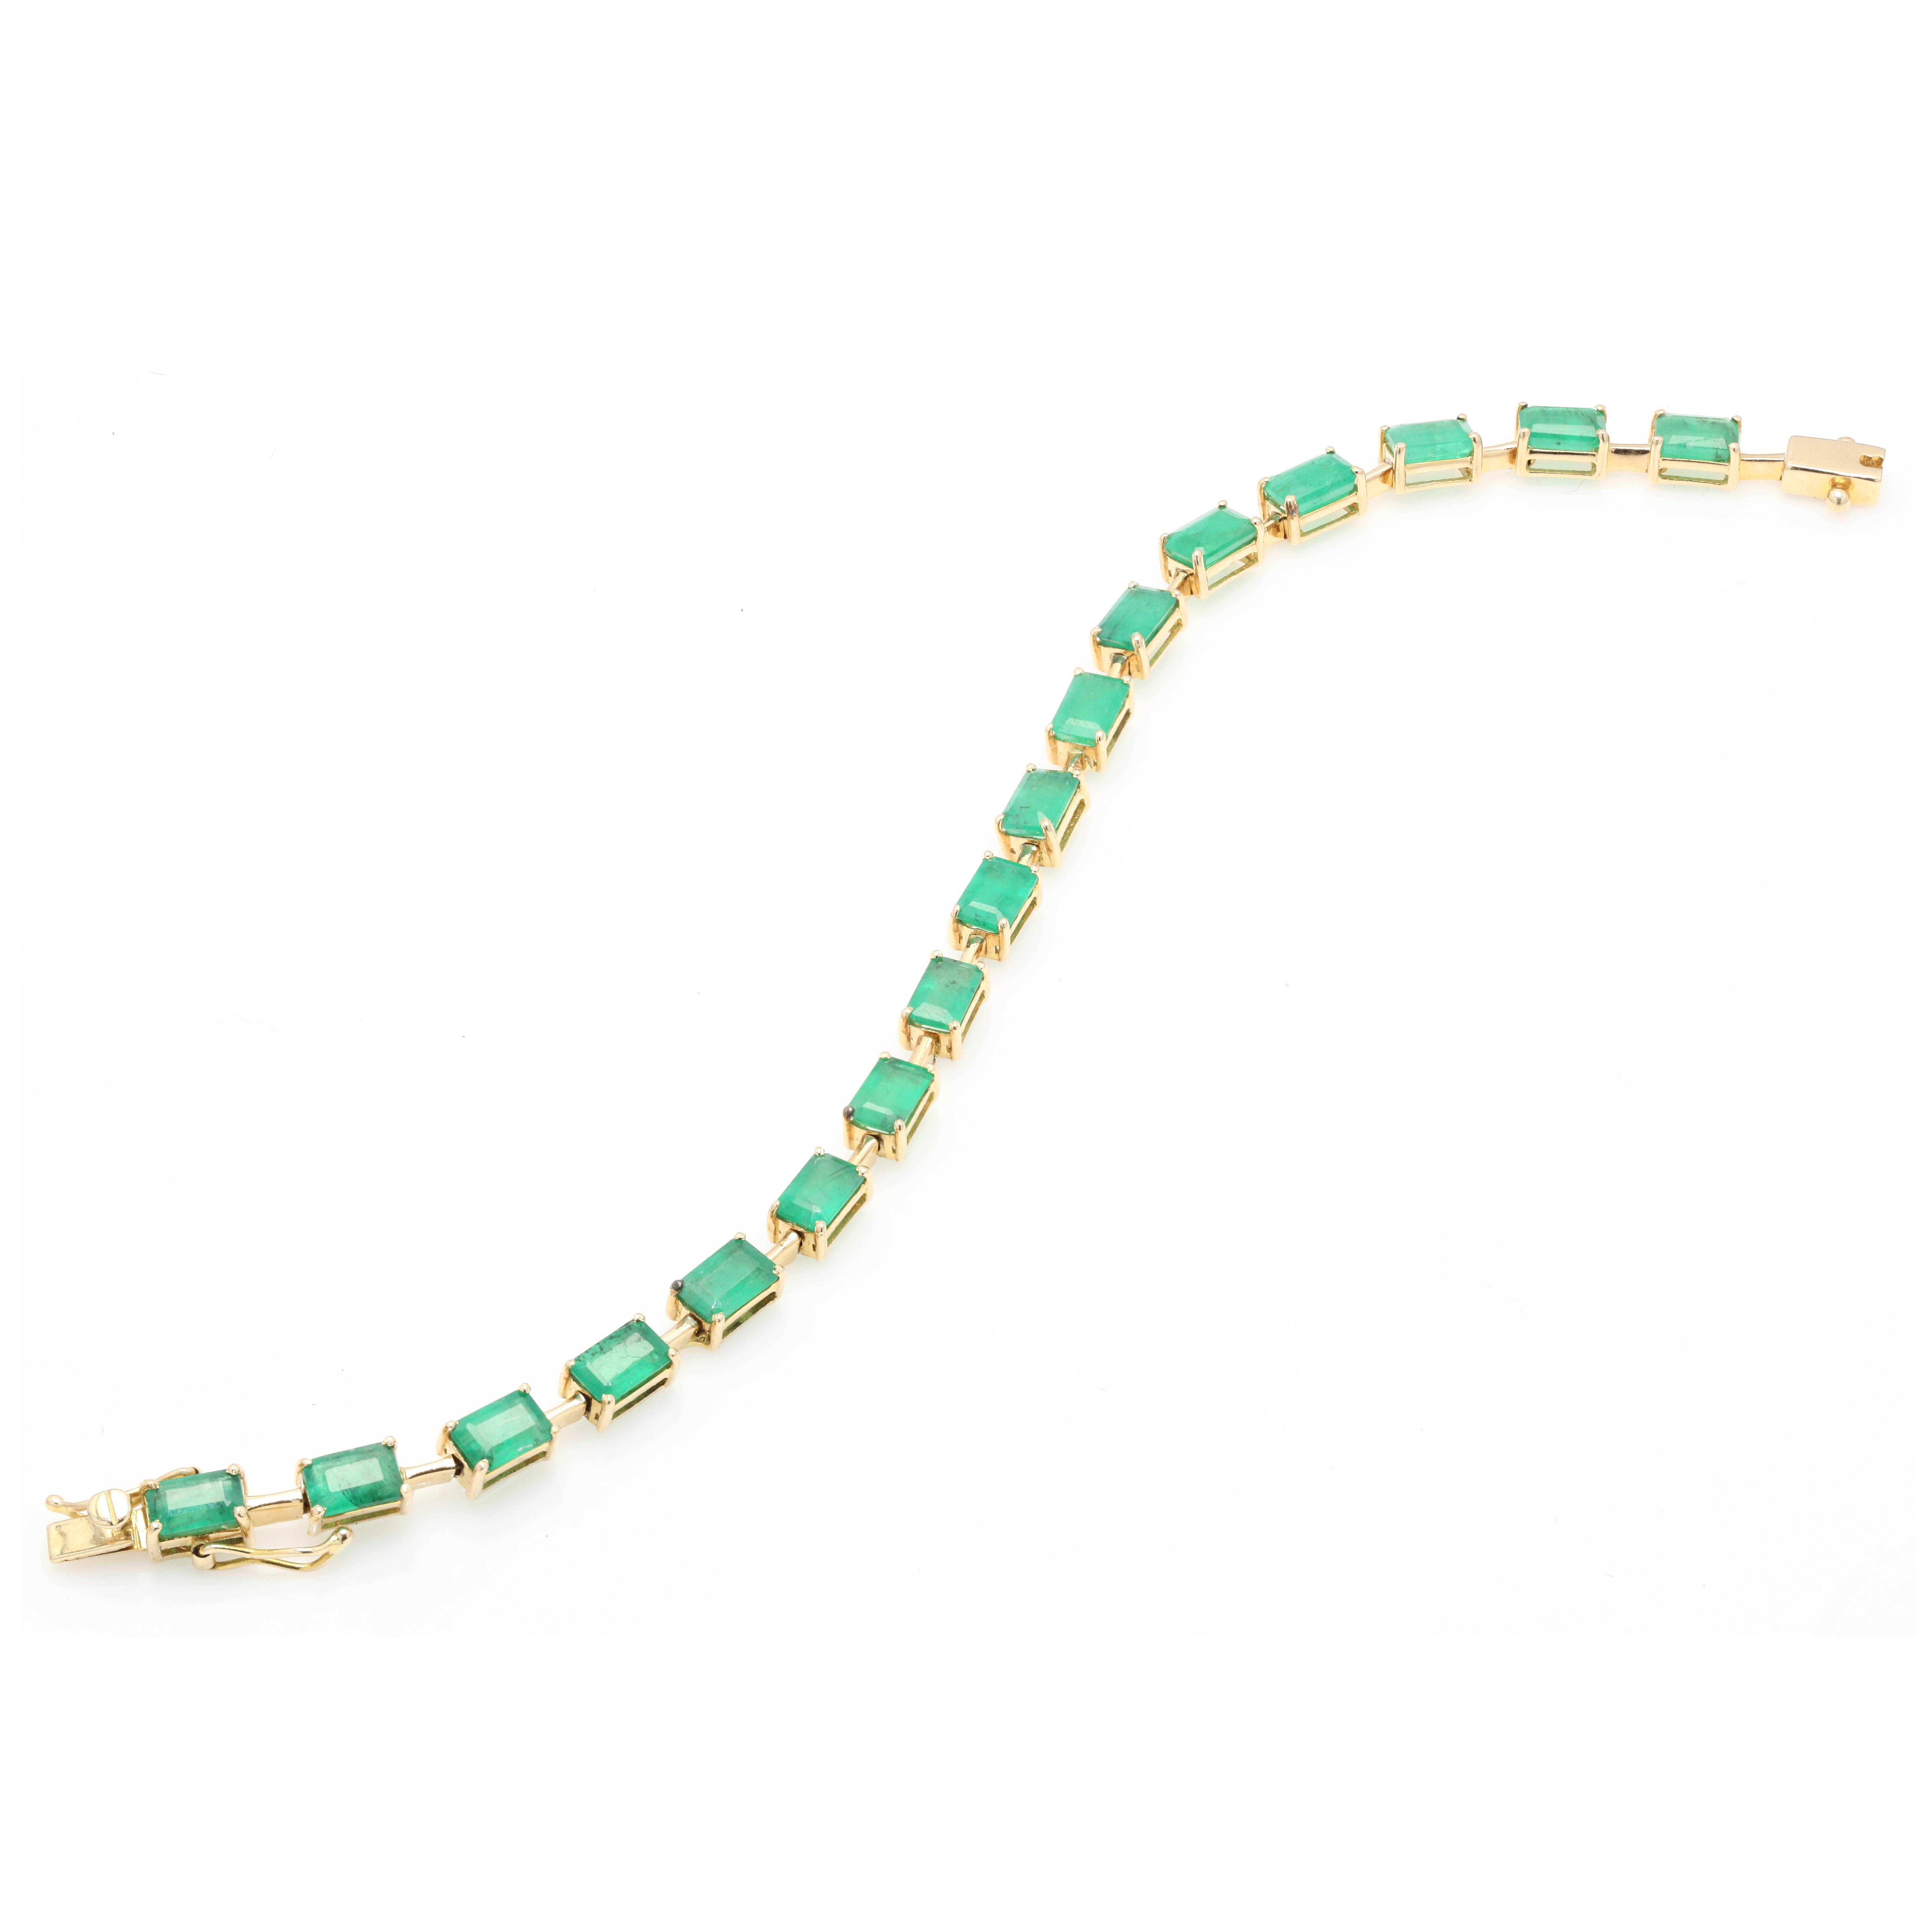 Natural emerald tennis bracelet in 14K Gold. It has a perfect baguette cut emerald to make you stand out on any occasion or an event.
A tennis bracelet is an essential piece of jewelry when it comes to your wedding day. The sleek and elegant style